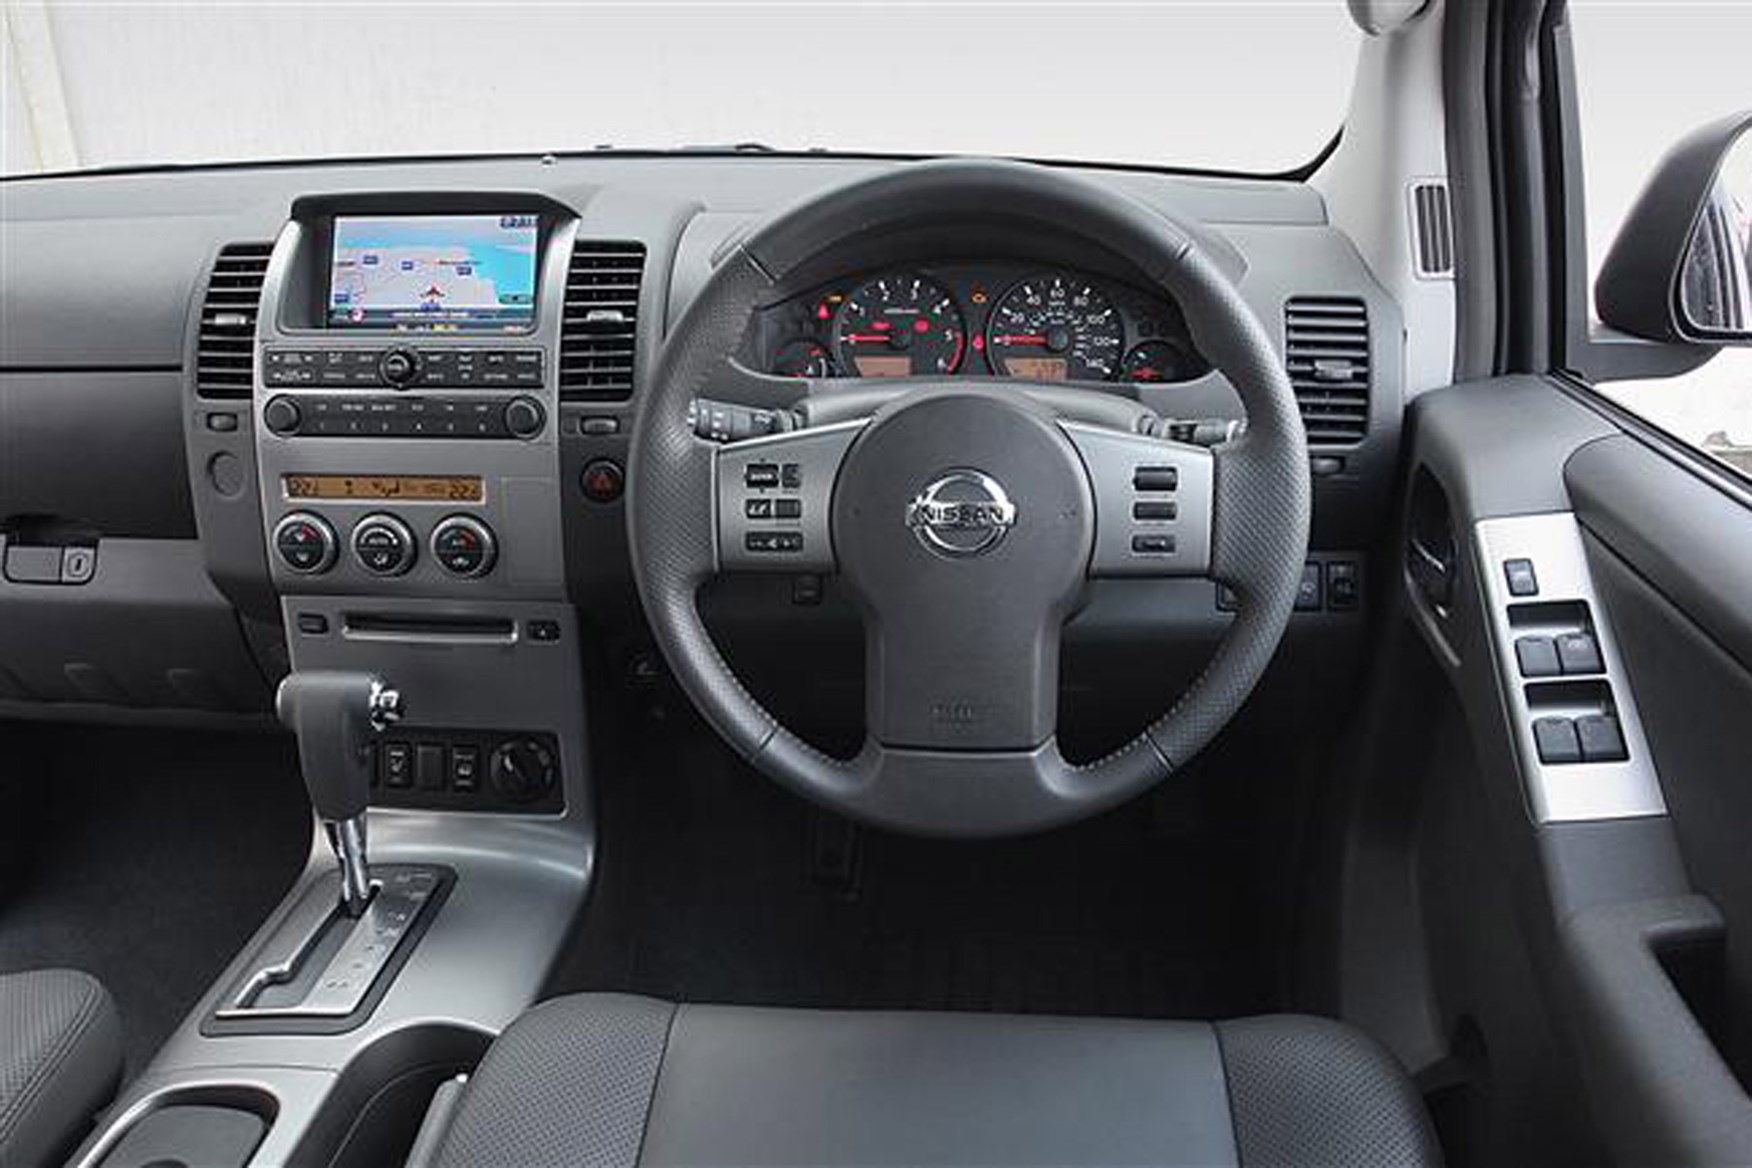 Nissan Navara 2005-2015 review on Parkers Vans - in the driver's seat